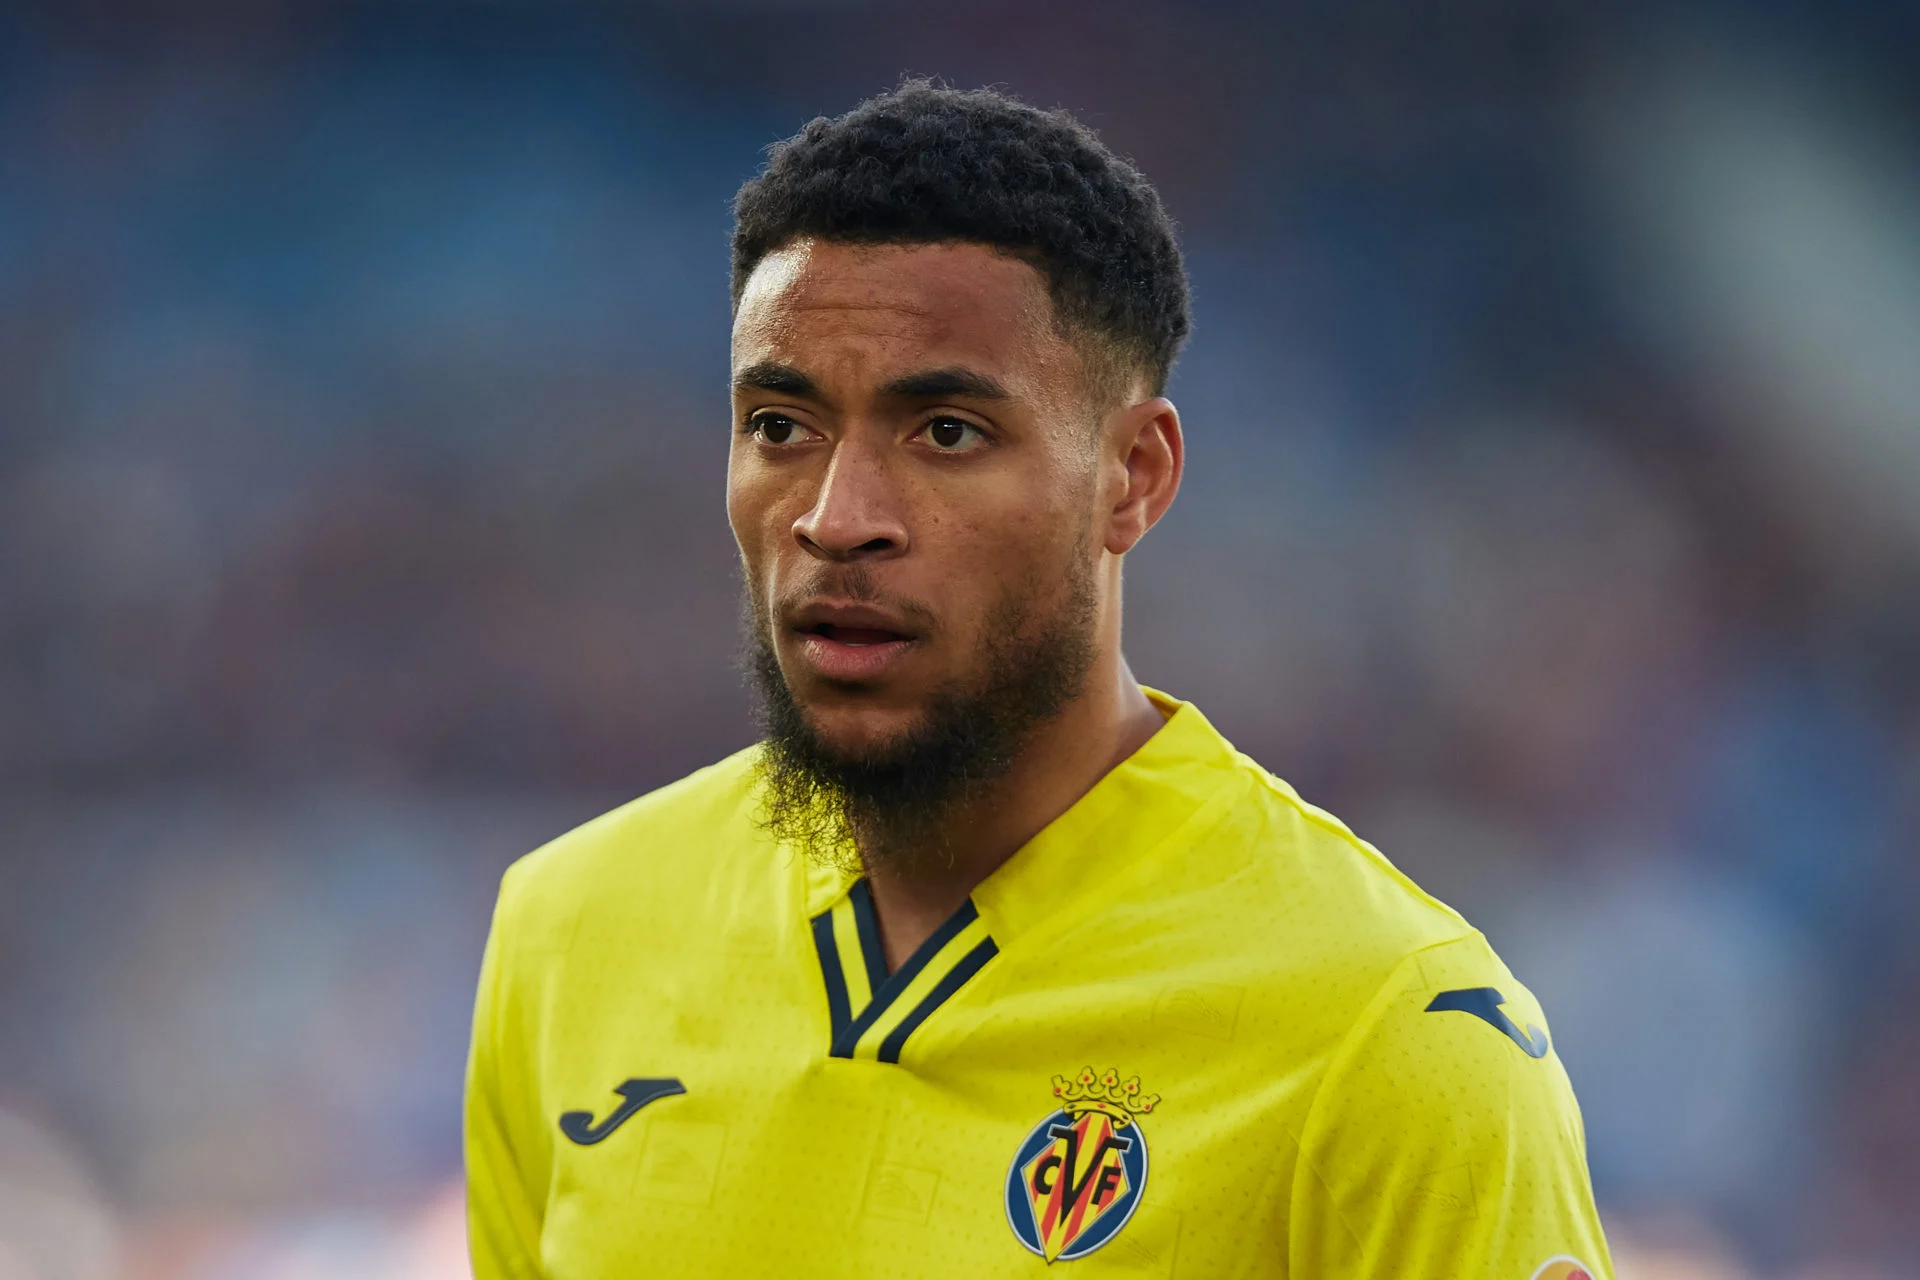 Milan are on the verge of missing out on Arnaut Danjuma as Everton overtook them. The Toffees were in contention to sign him last January.